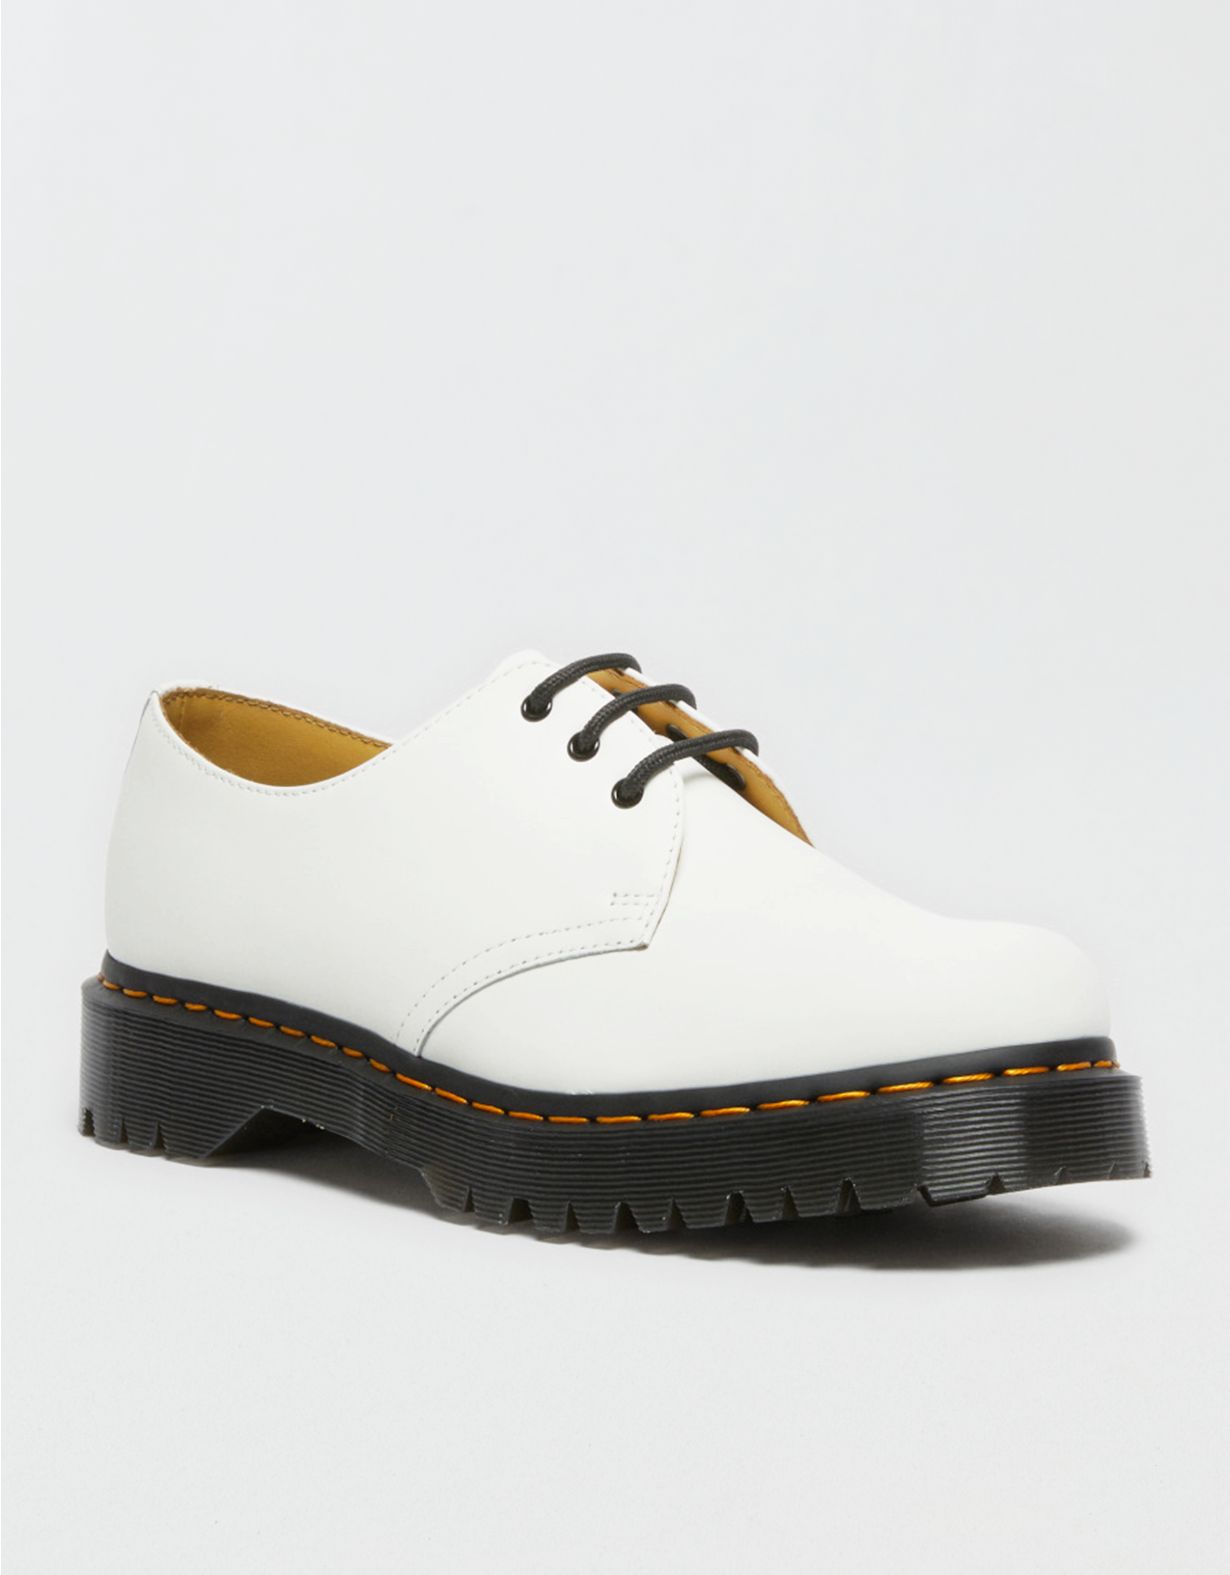 Dr. Martens Bex Leather Oxford Shoes